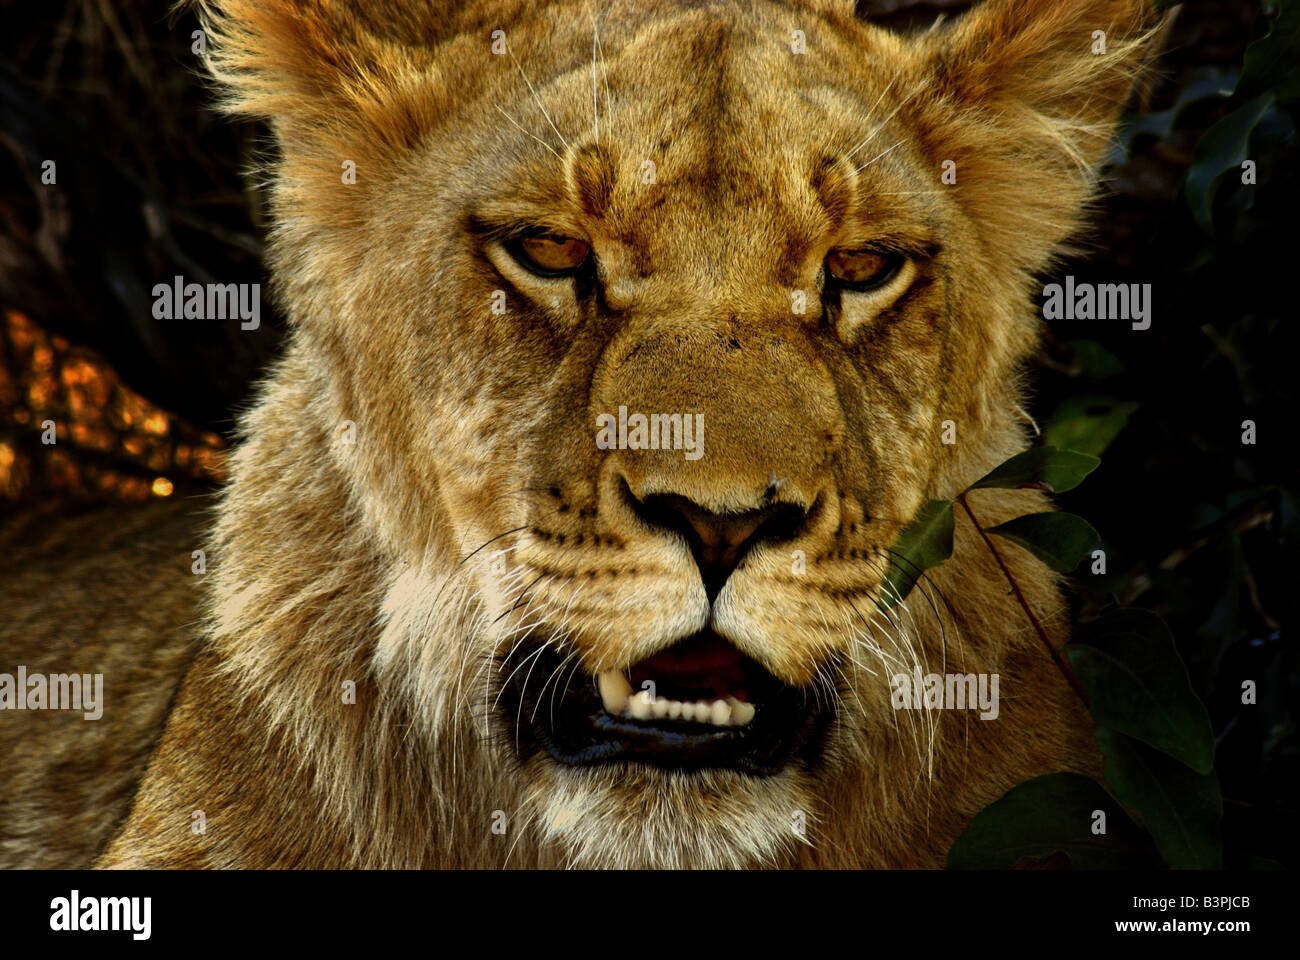 Young Lion close-up Stock Photo